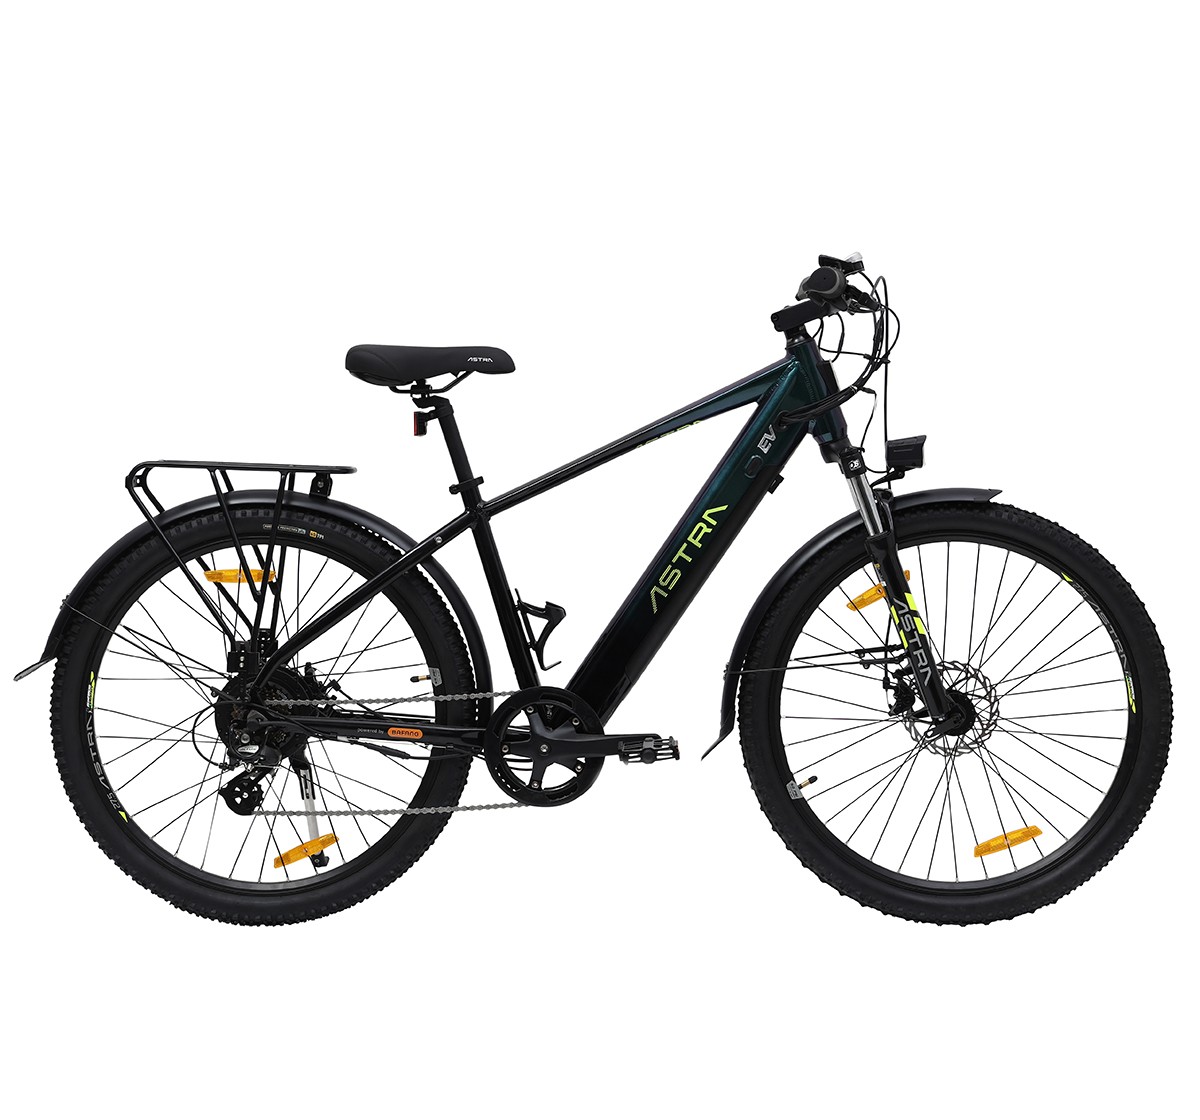 Astra 27.5 Inch 7S Magnatron E-bike, High Tensile Steel TIG Welded frame, Internal Cable Routing, 12Y+, Black